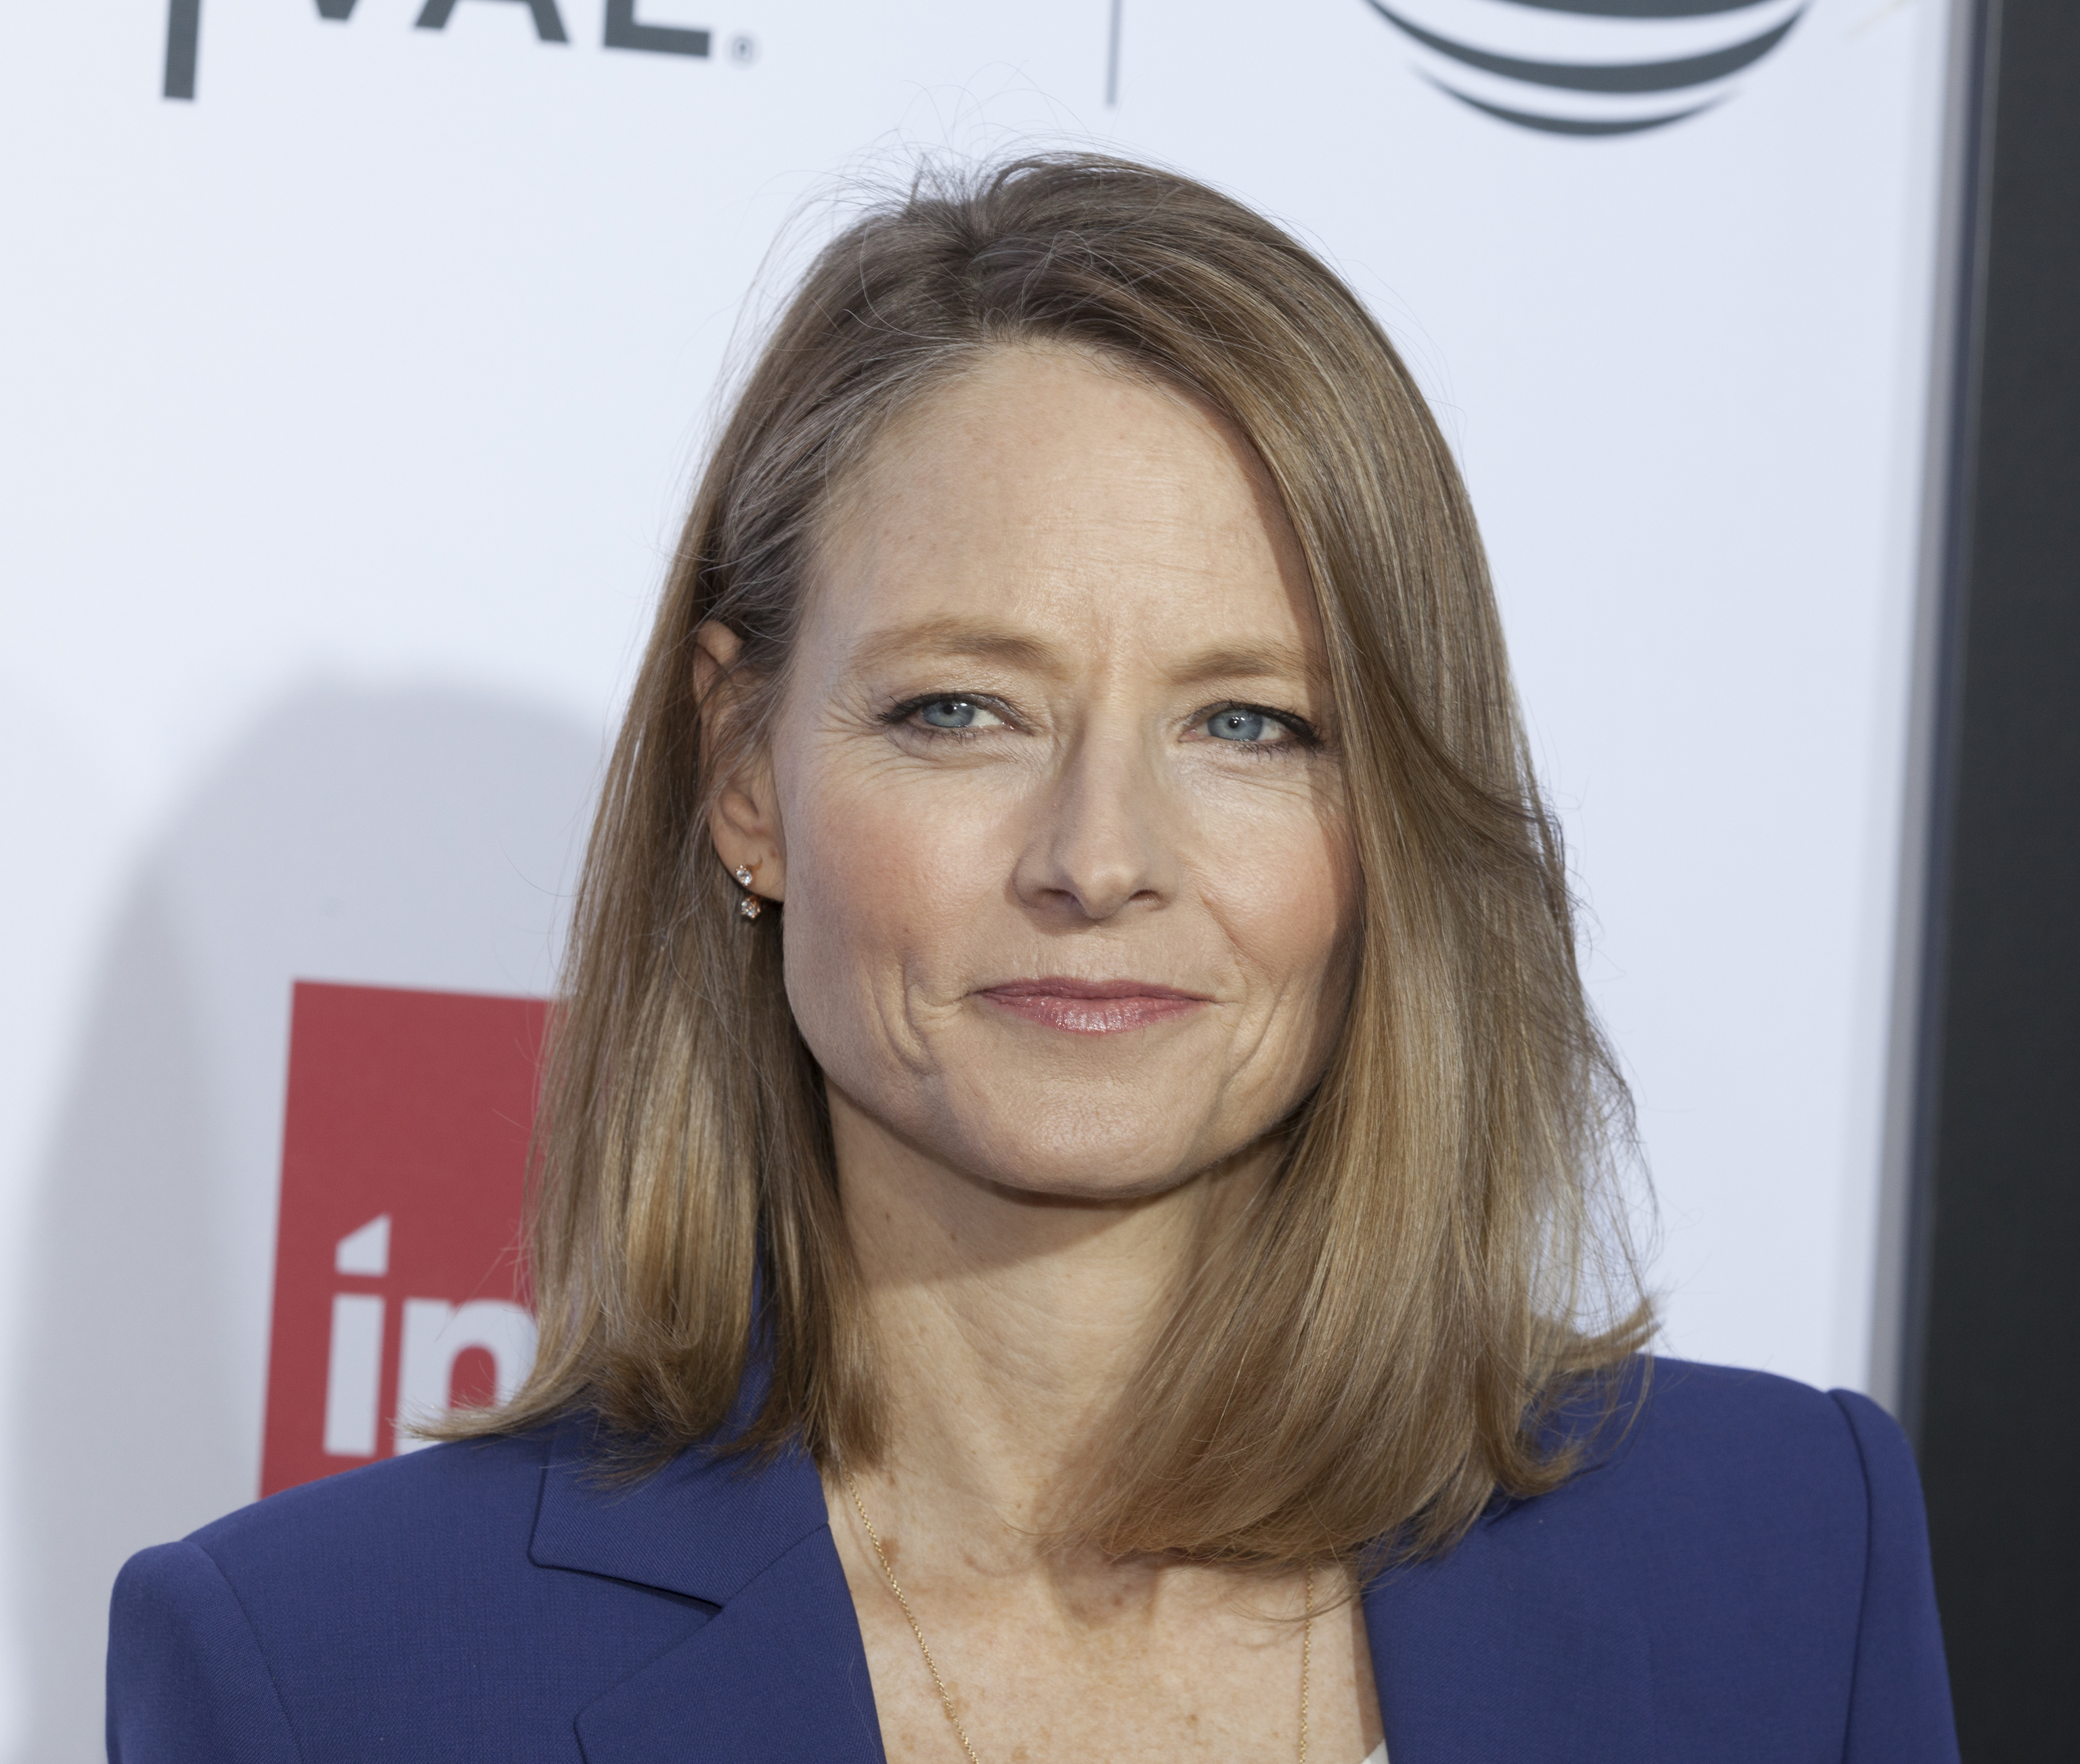 Jodie Foster attends the 40th anniversary screening of Taxi Driver in 2016.